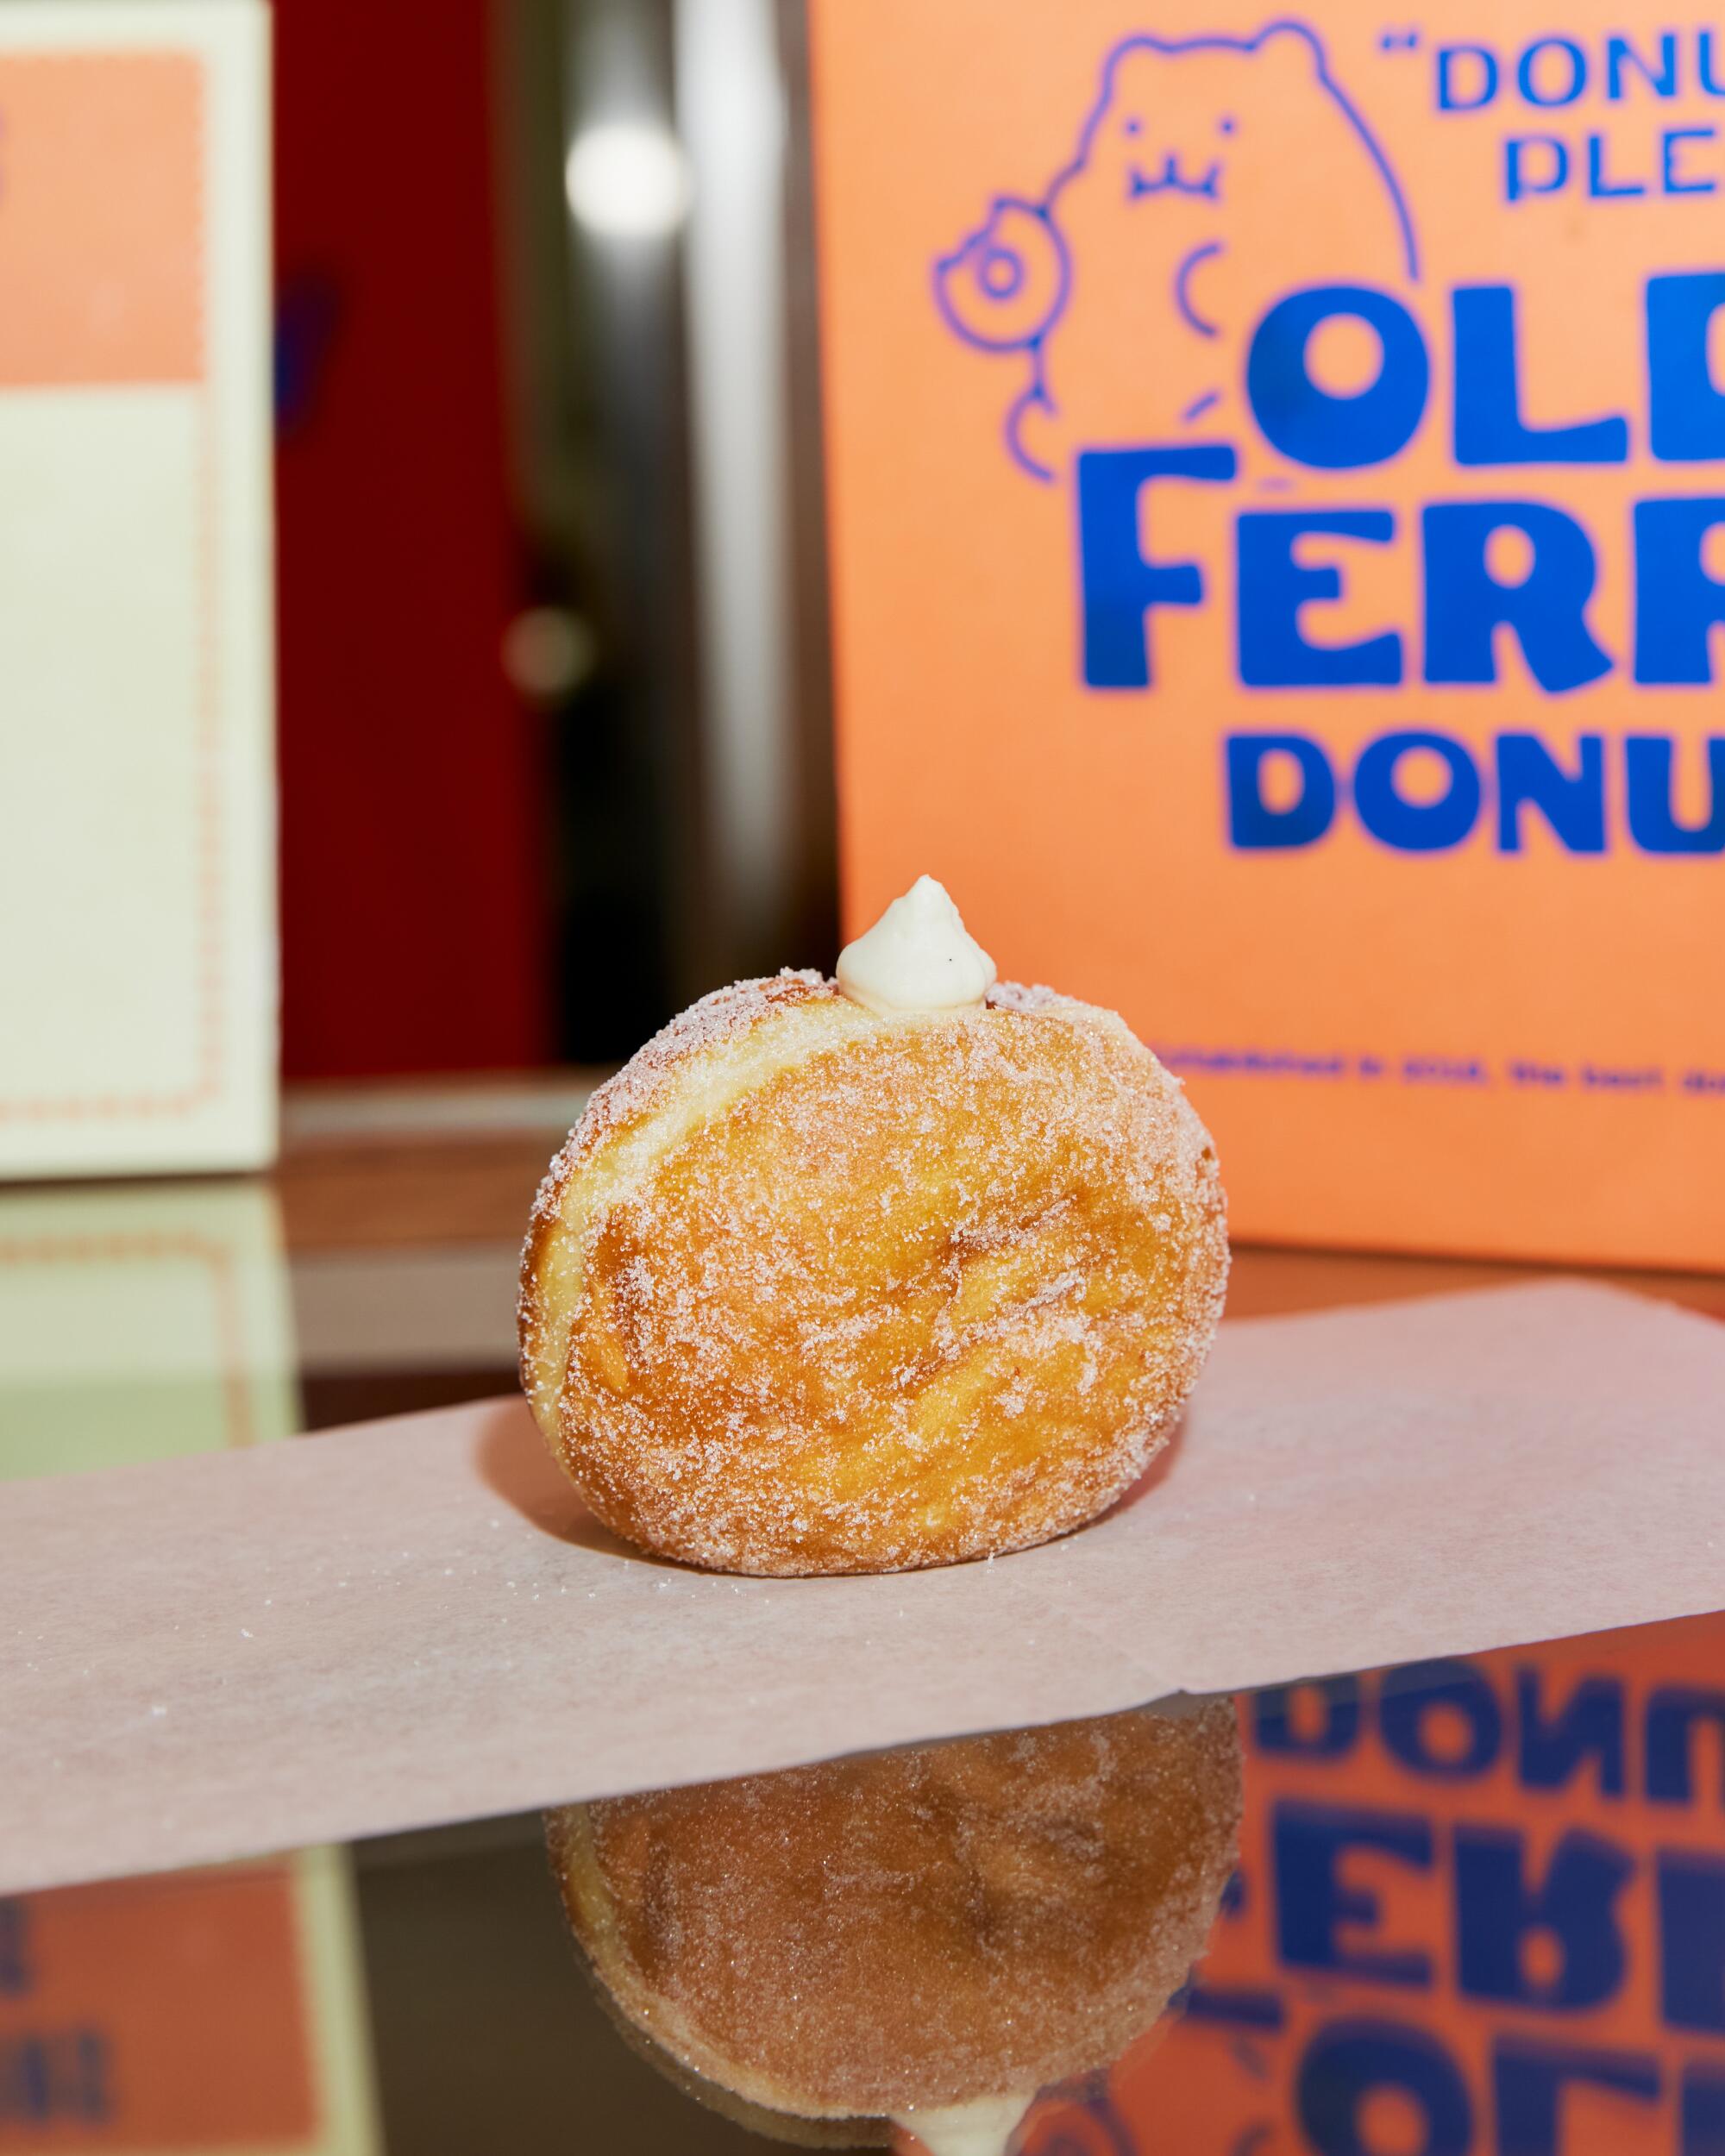 The Source OC is home to the first stateside location of Old Ferry Donut, a concept that debuted in Seoul.